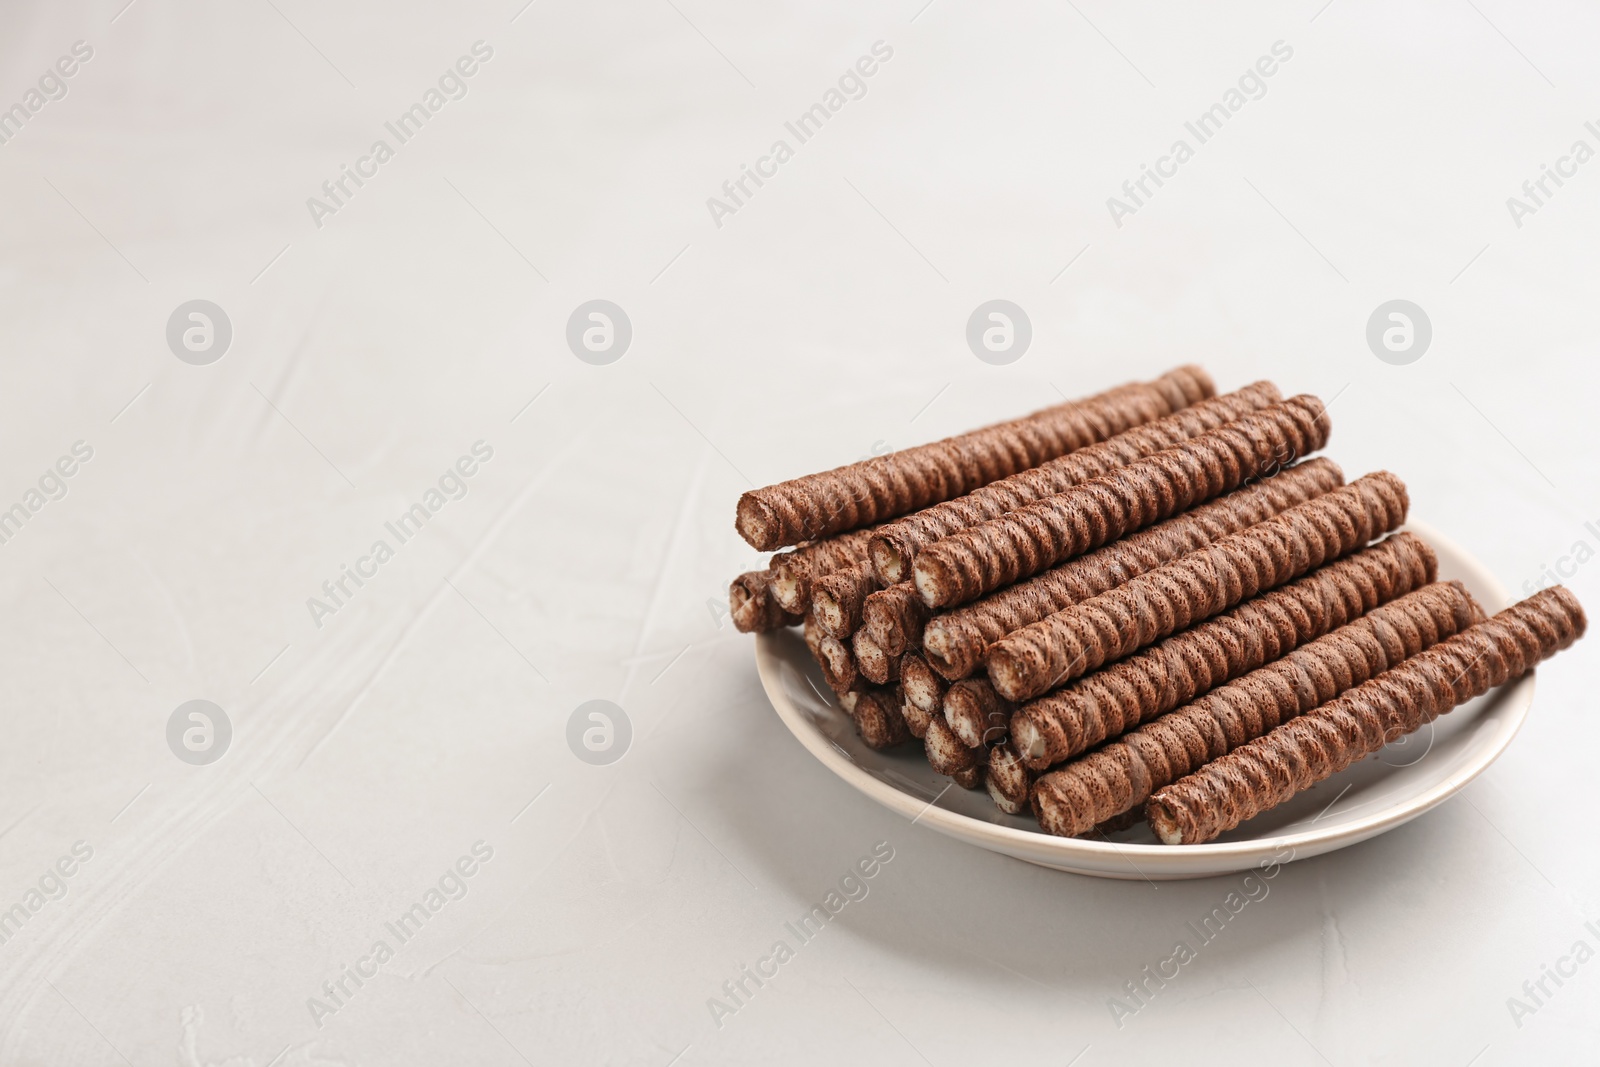 Photo of Plate with delicious chocolate wafer rolls on white table, space for text. Sweet food